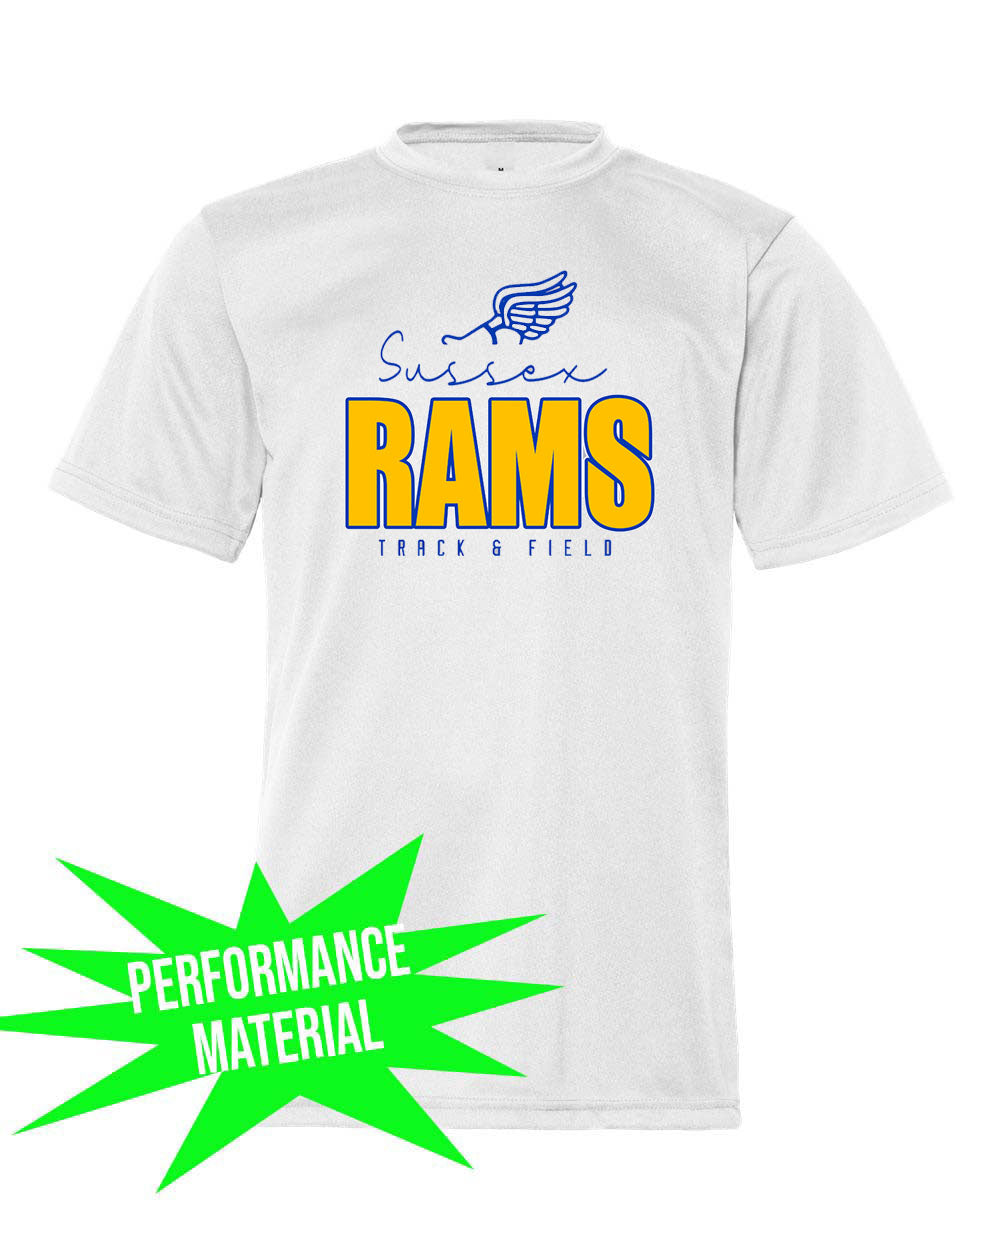 Sussex Rams Track Performance Material T-Shirt Design 4